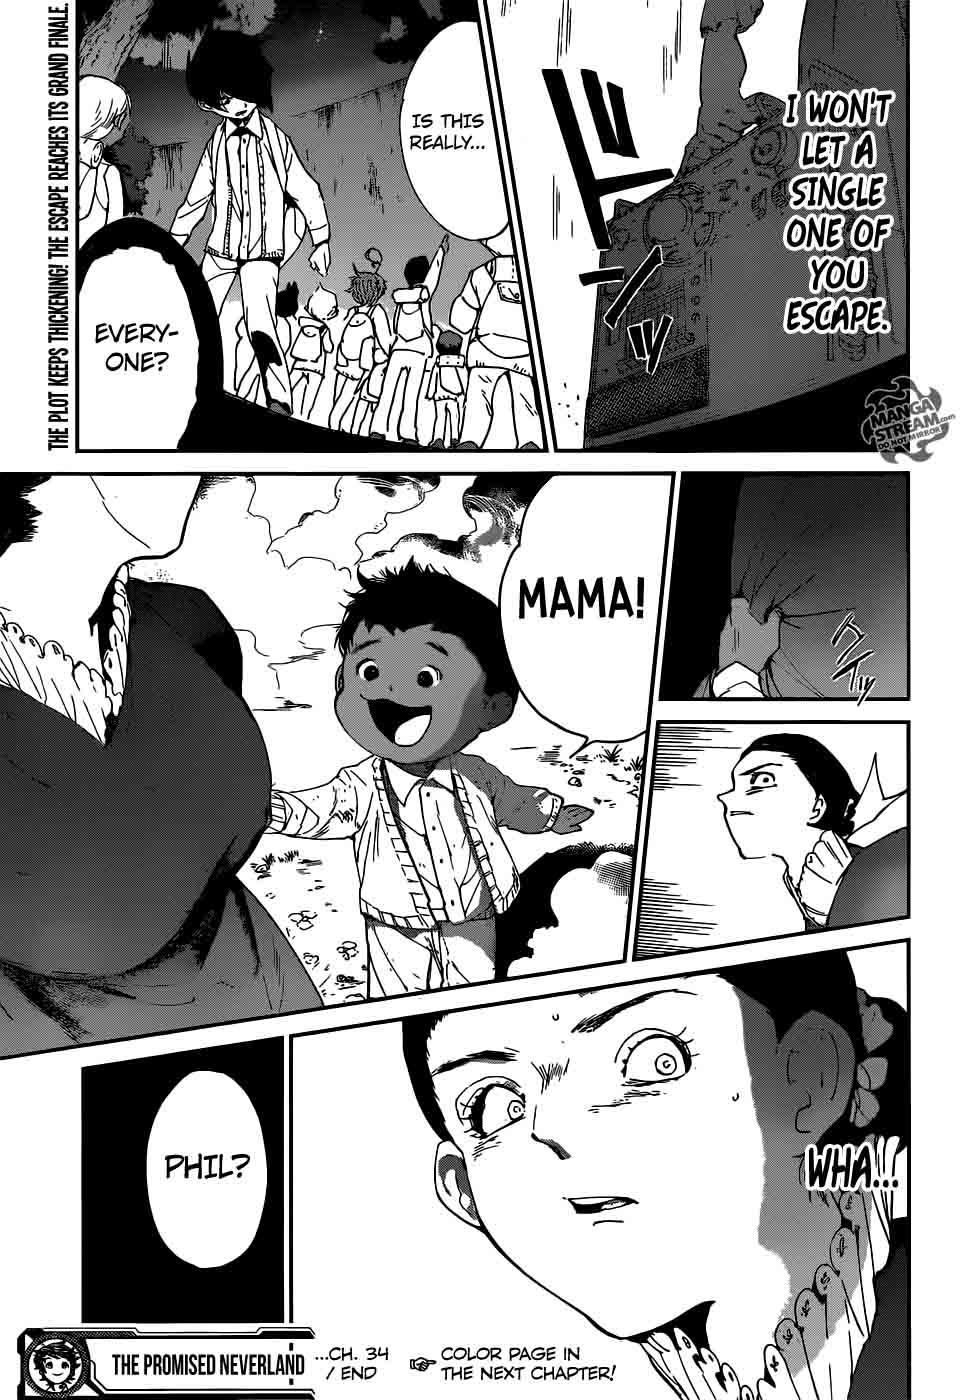 The Promised Neverland 34 20